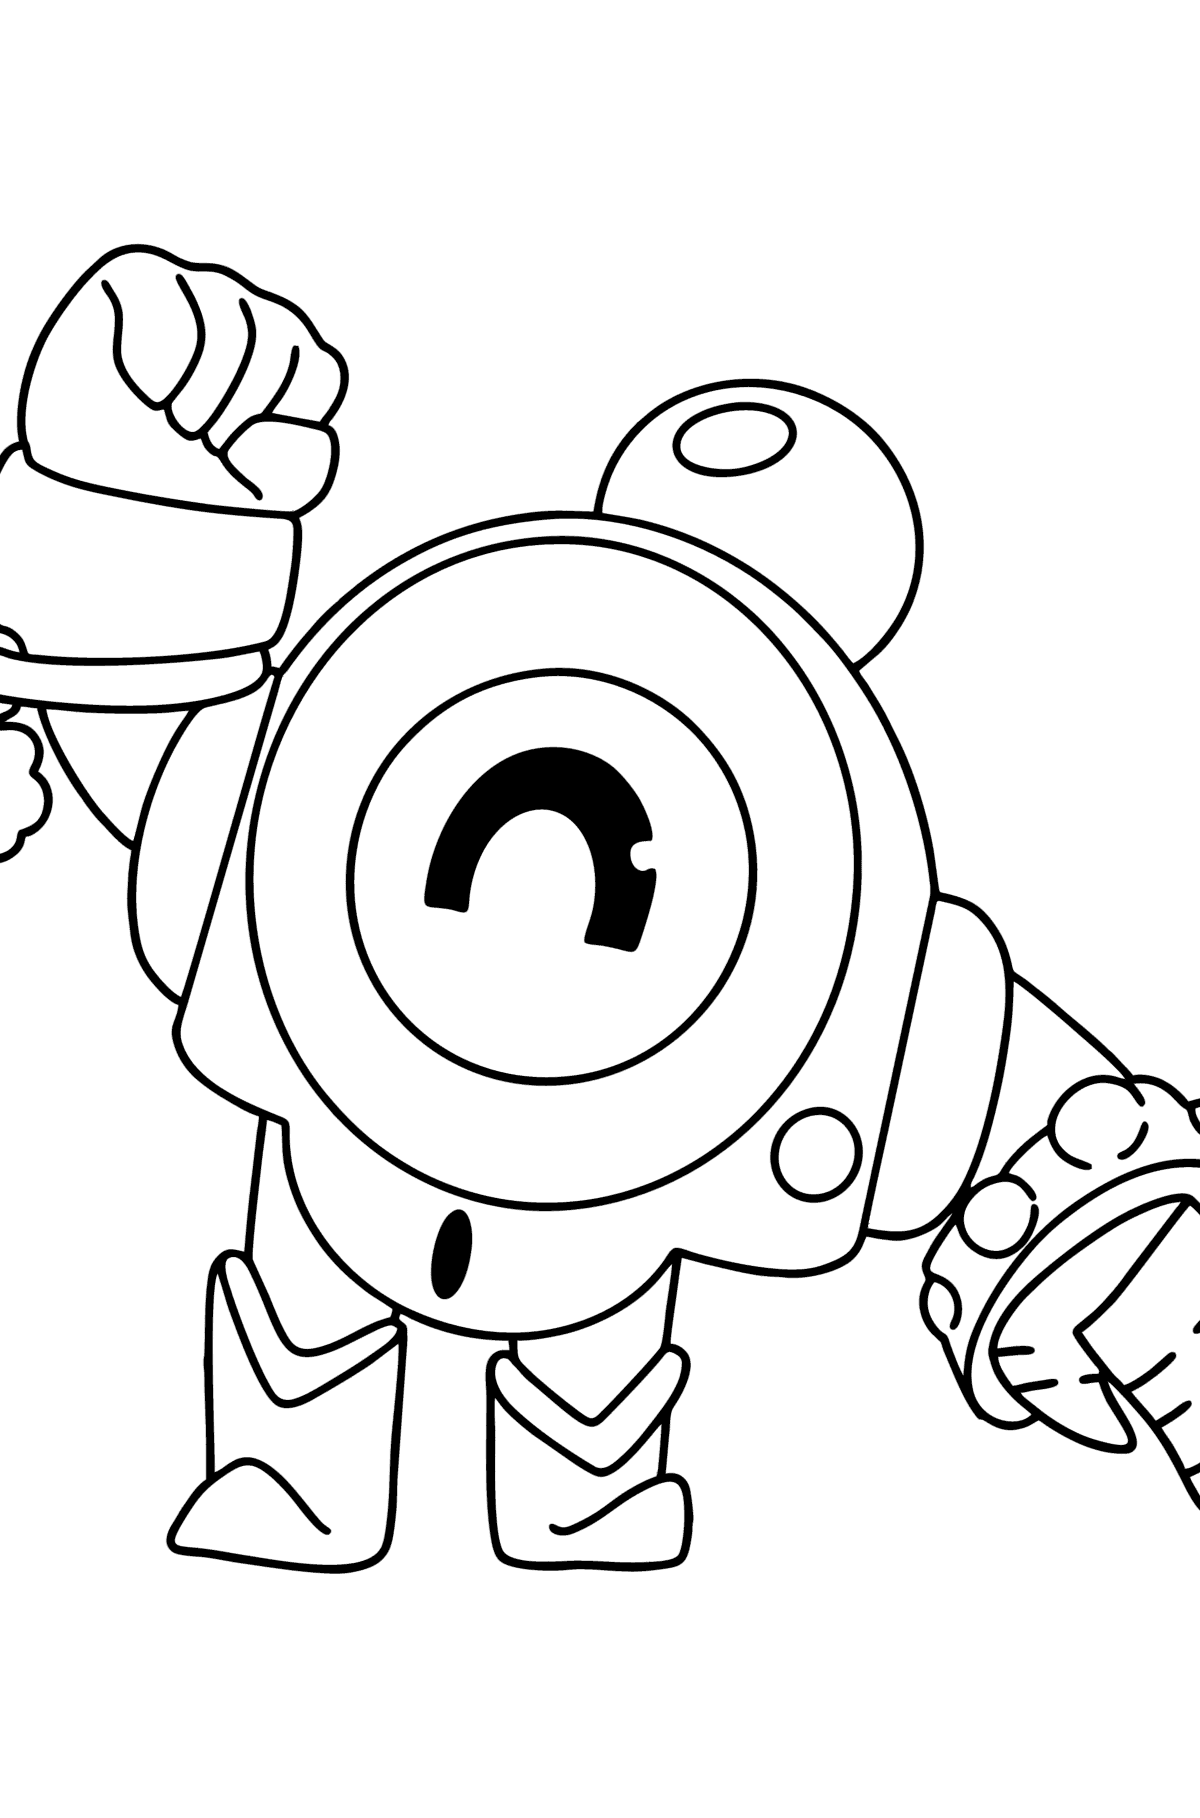 Brawl Stars Nani coloring page - Coloring Pages for Kids